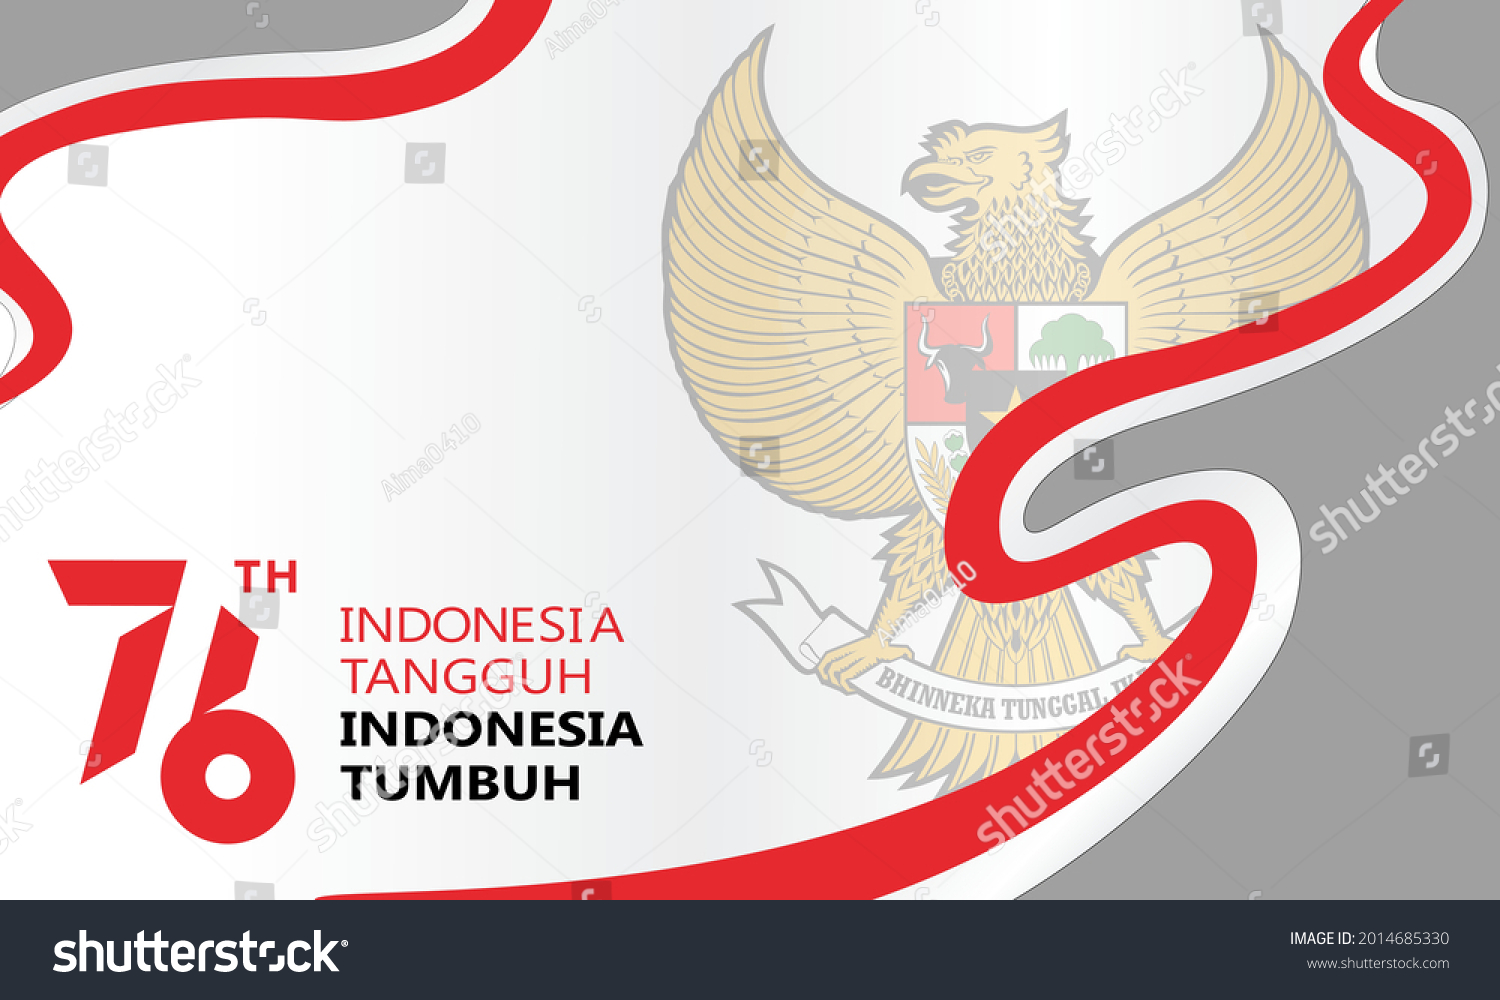 76th Republic Indonesia Anniversary Banner Background Stock Vector Royalty Free 2014685330 1392